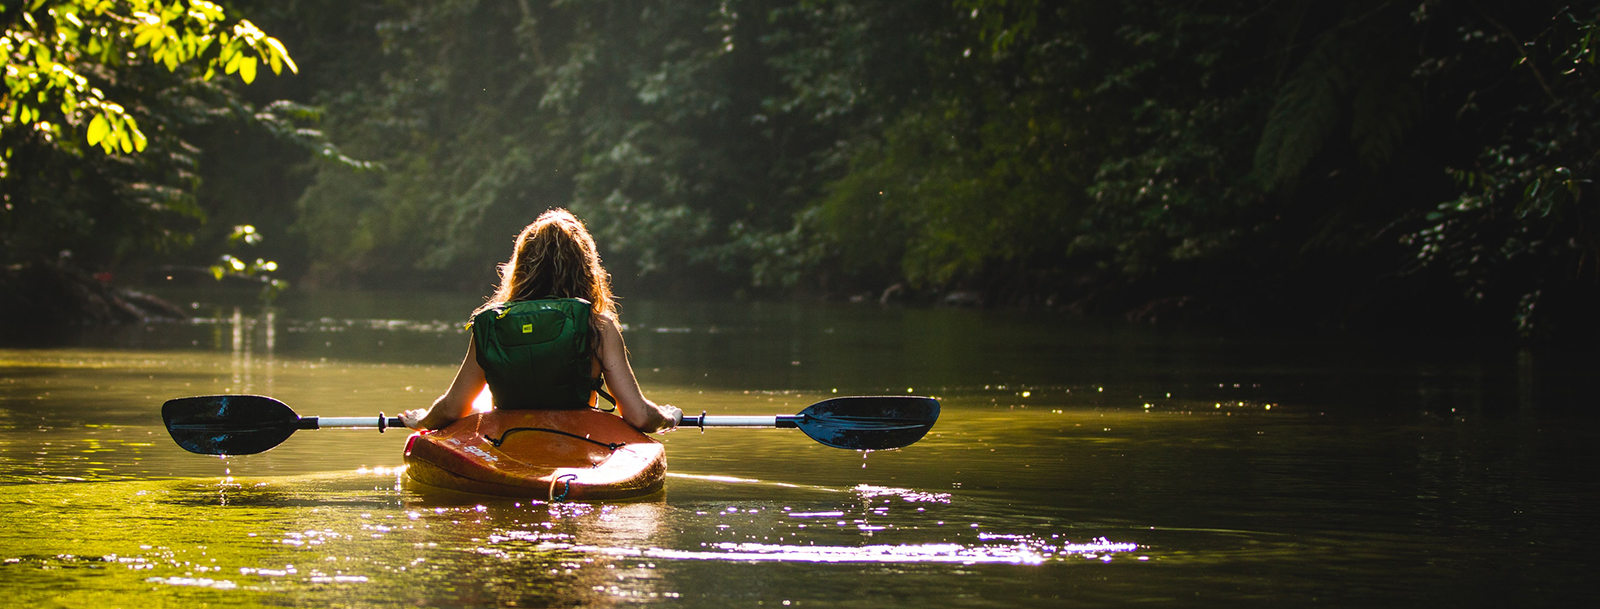 kayaking as an adventure sport to keep you fit.
